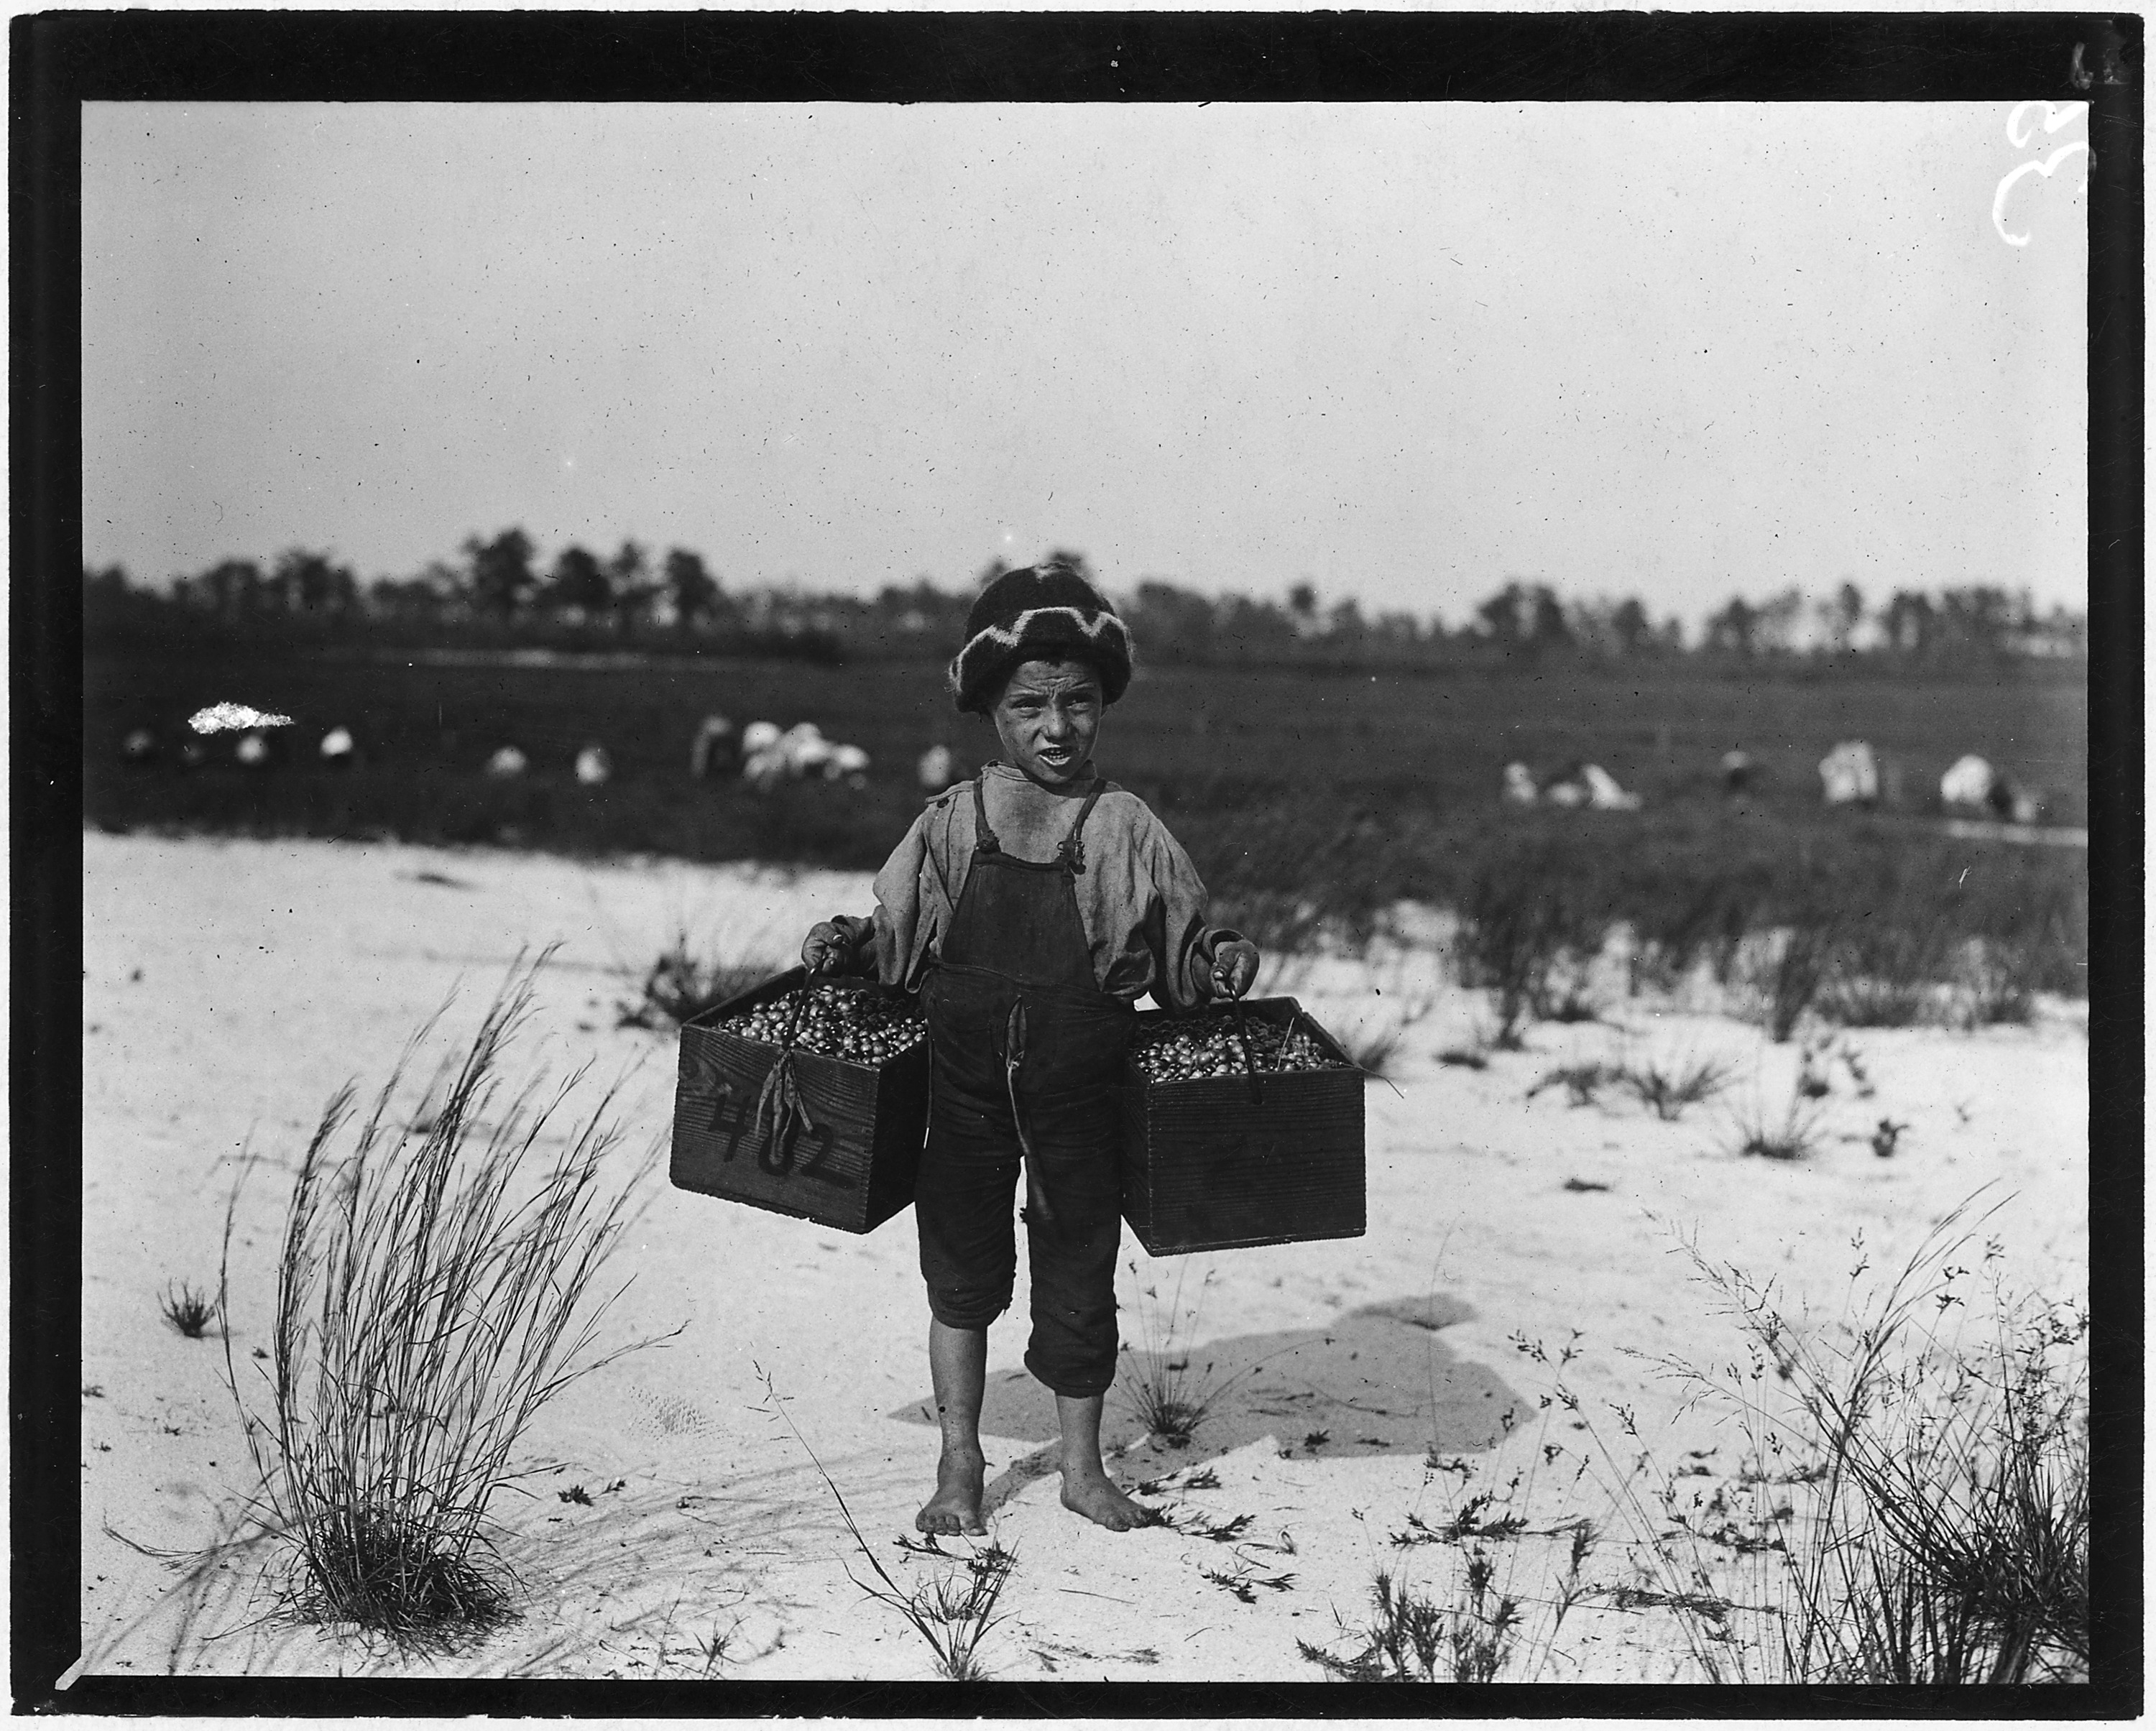 Salvin Nocito, 5 years old, carries 2 pecks of cranberries for long distance to the bushel man. Whites Bog. Brown... - NARA - 523267